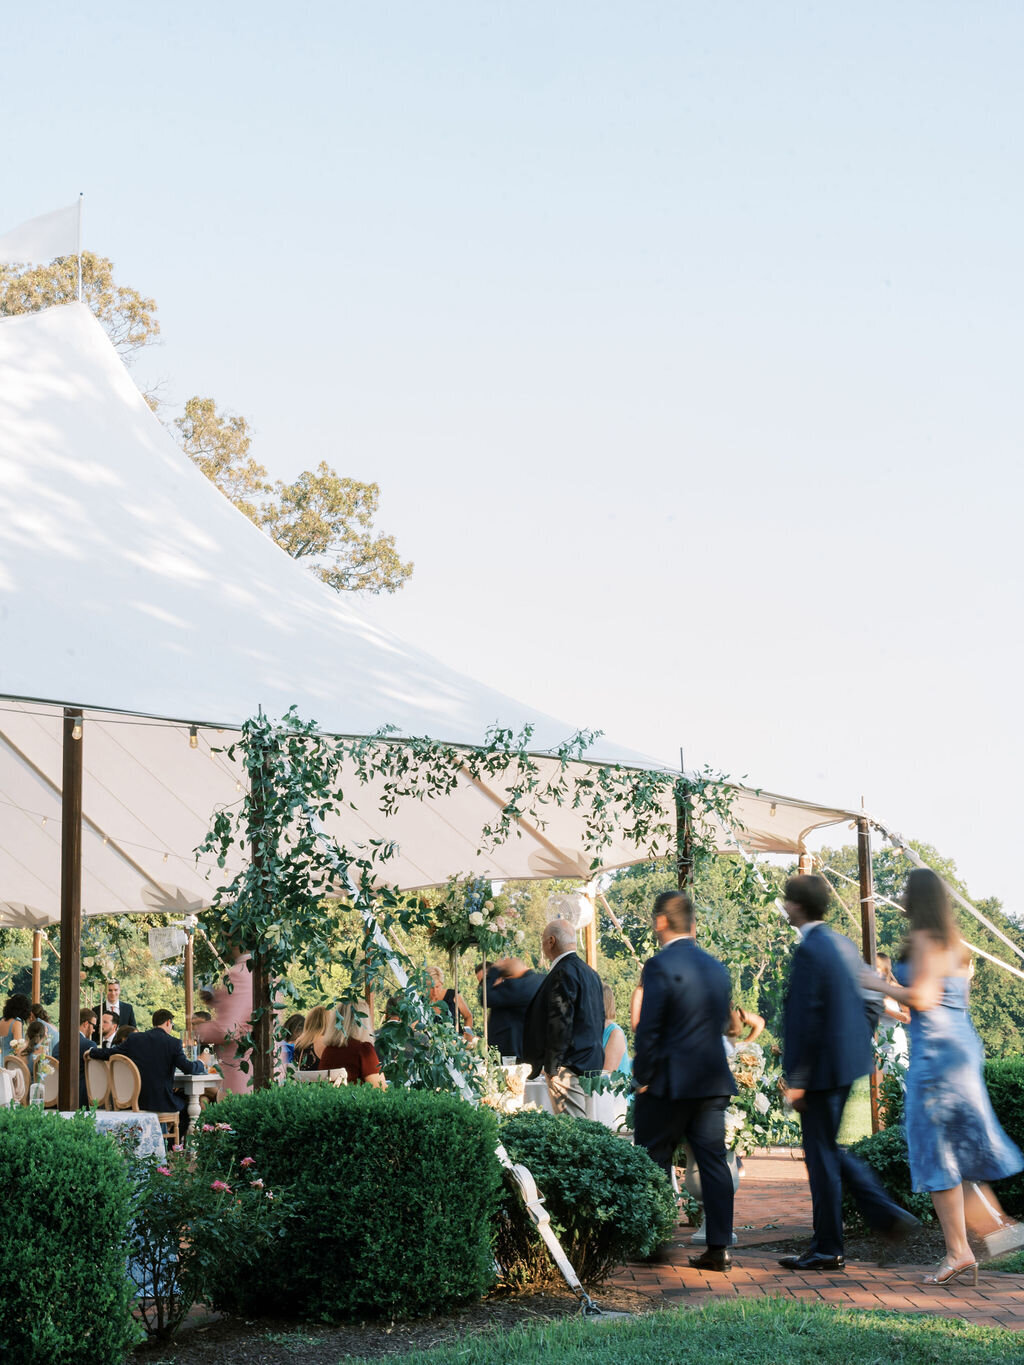 Guests walking into the reception tent at Brittland Estate.